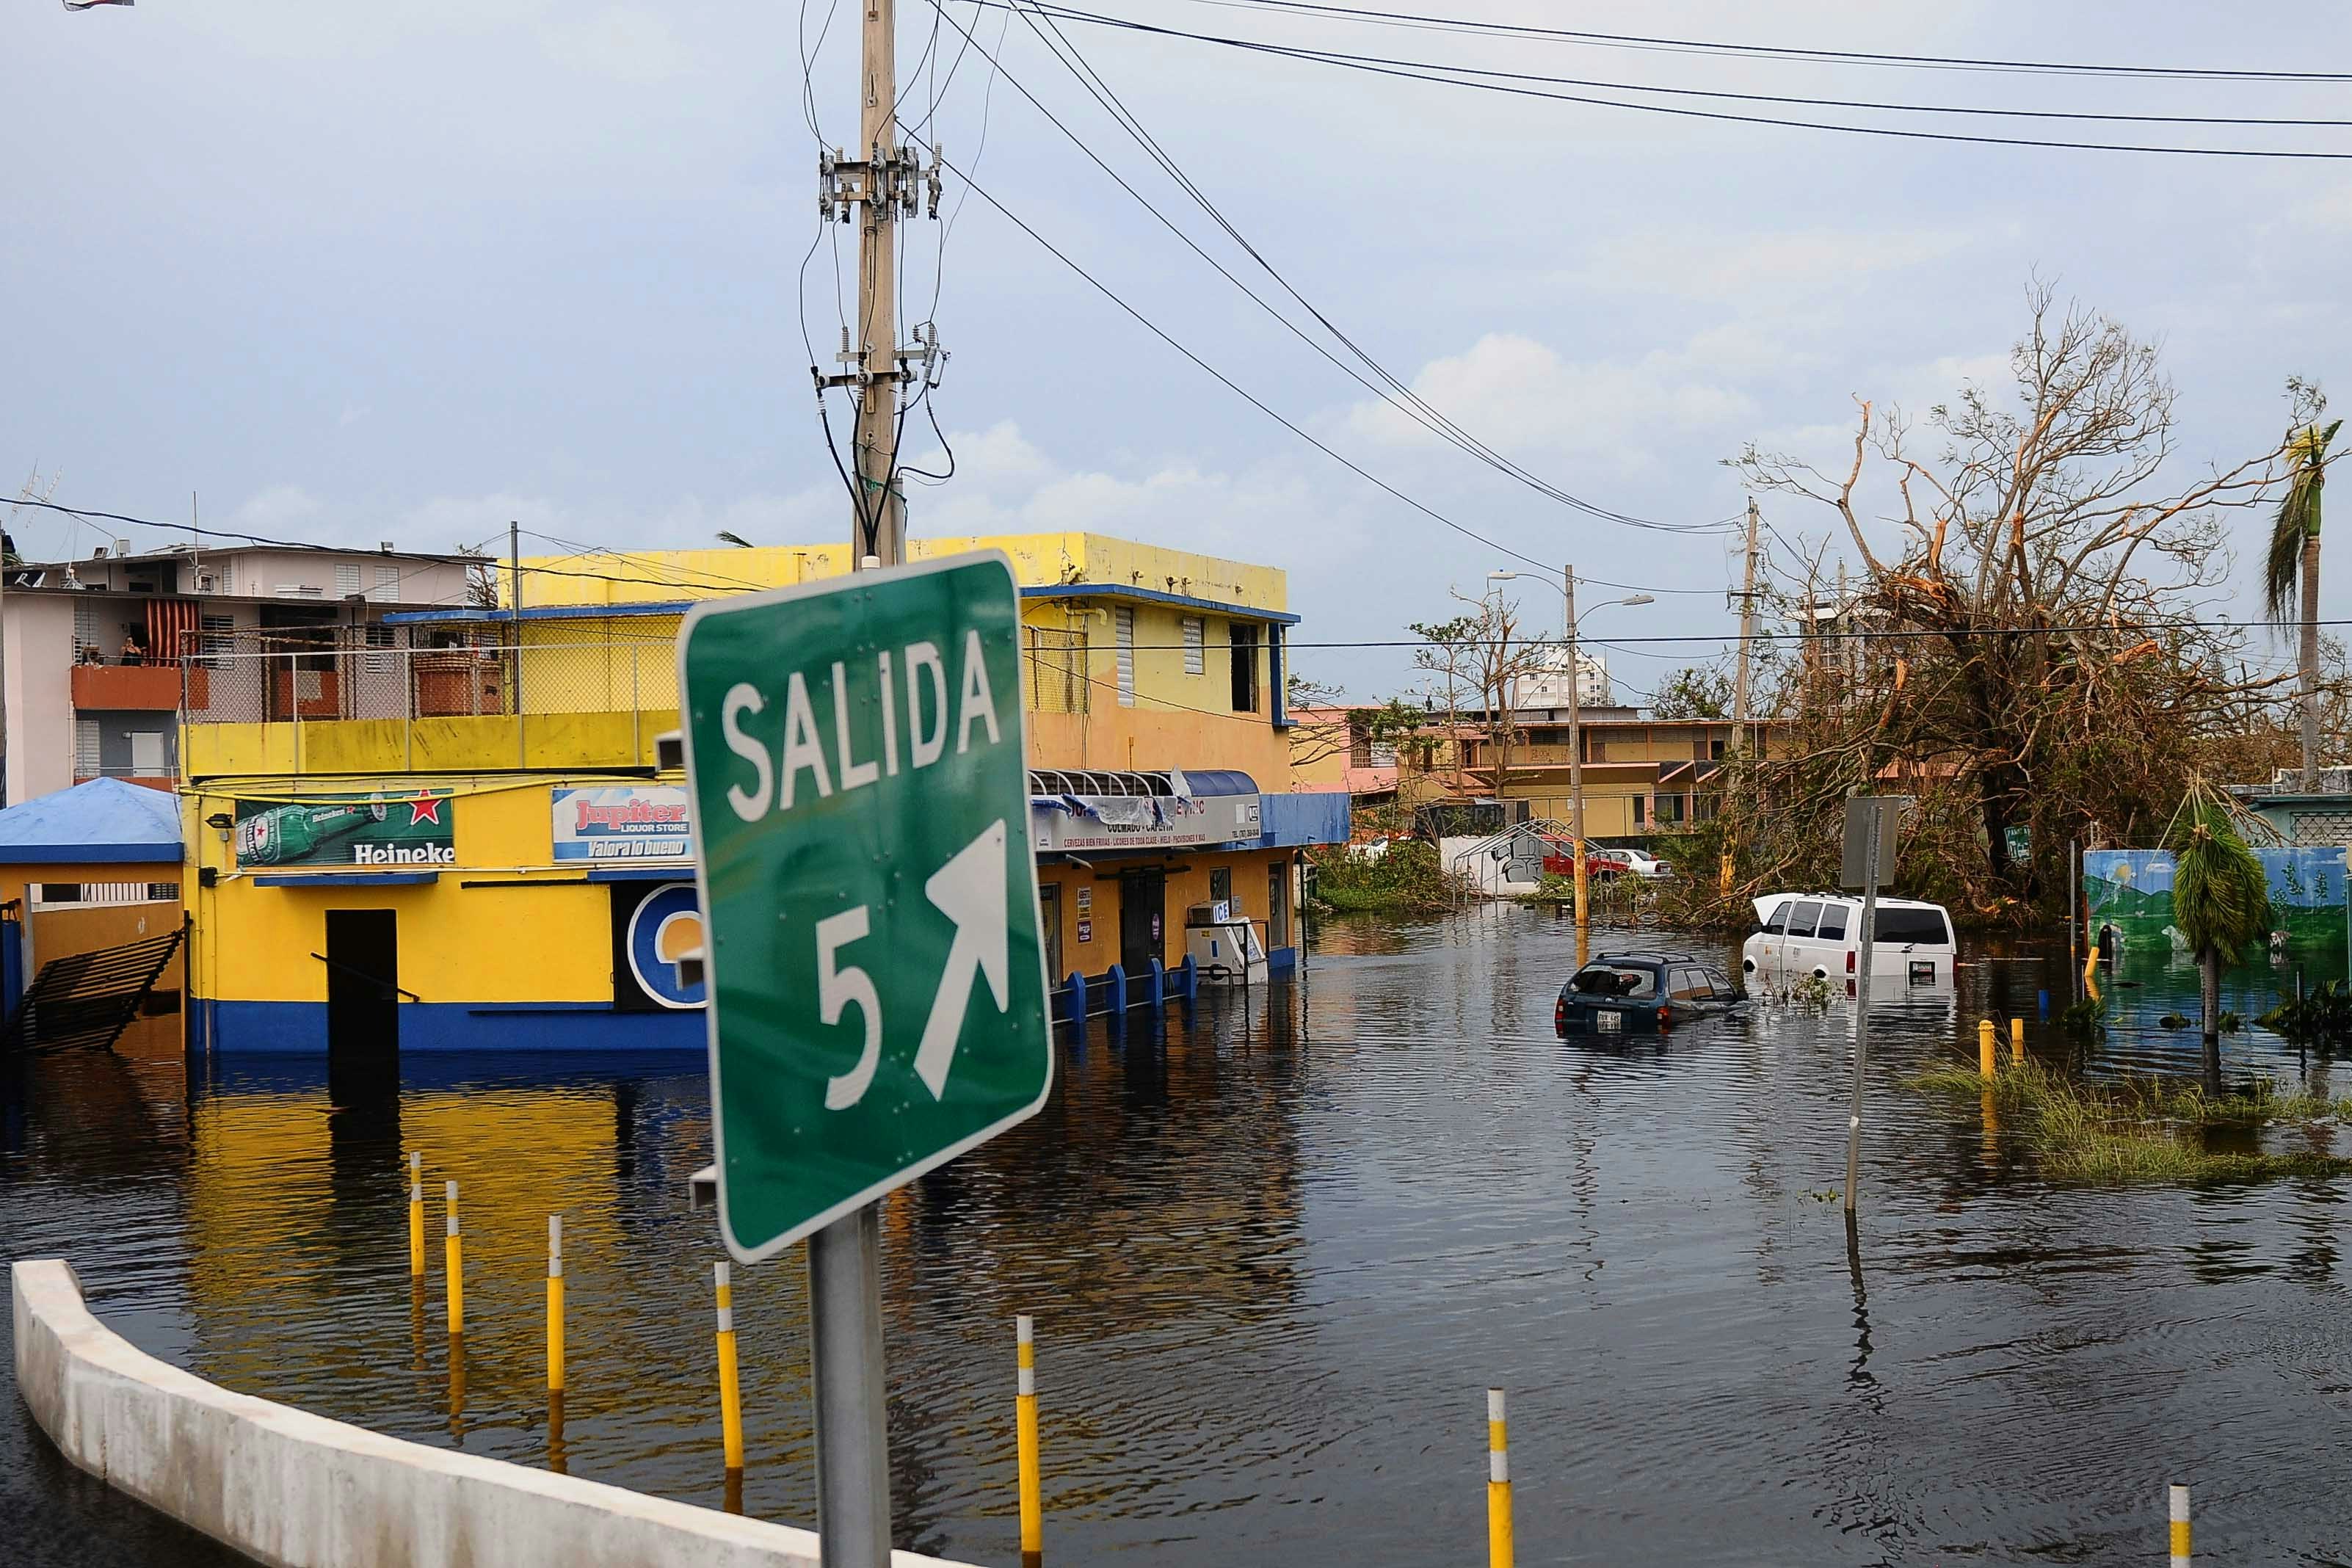 Flooded streets in a town in PR in the aftermath of Hurricane Maria